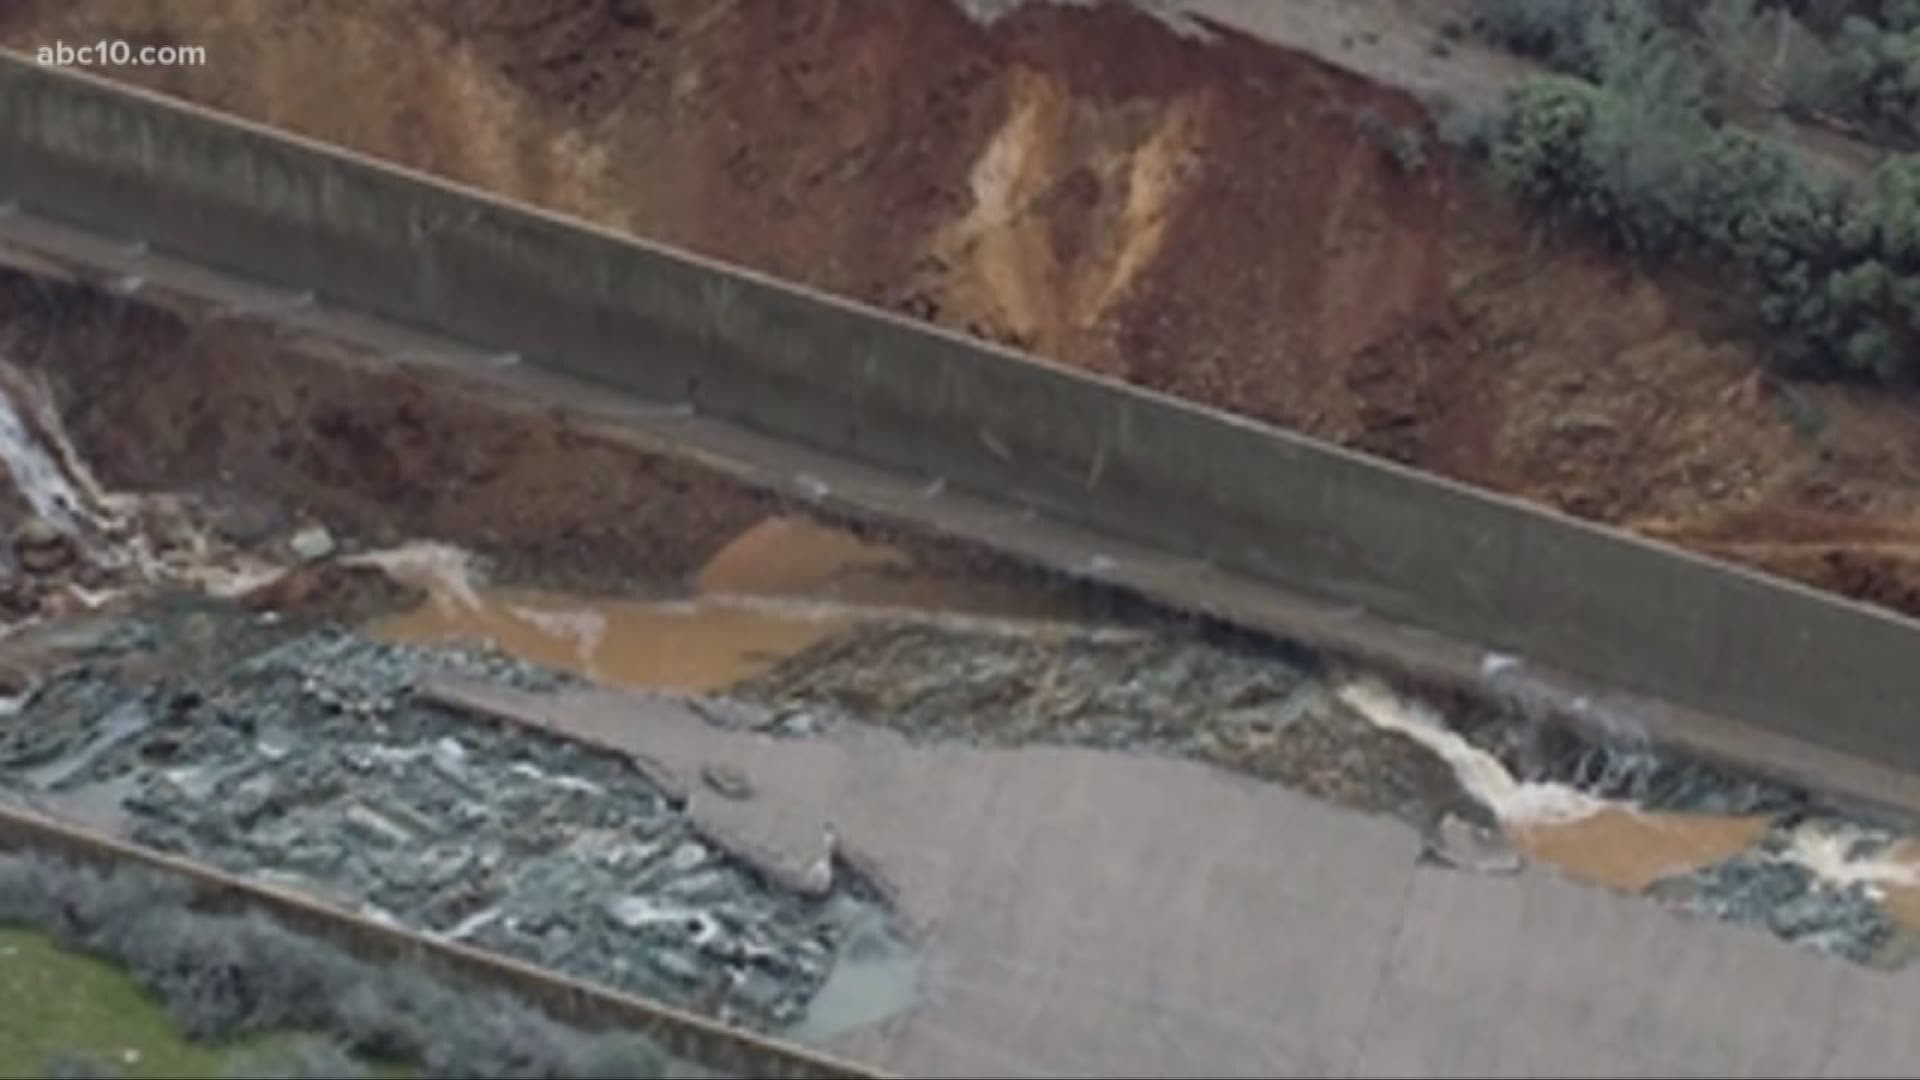 Today, the Oroville Dam Spillway will be used for the first time since a near catastrophe two years ago that forced more than 180,000 evacuations. That and more on your Daily Blend of weather, traffic and headlines.